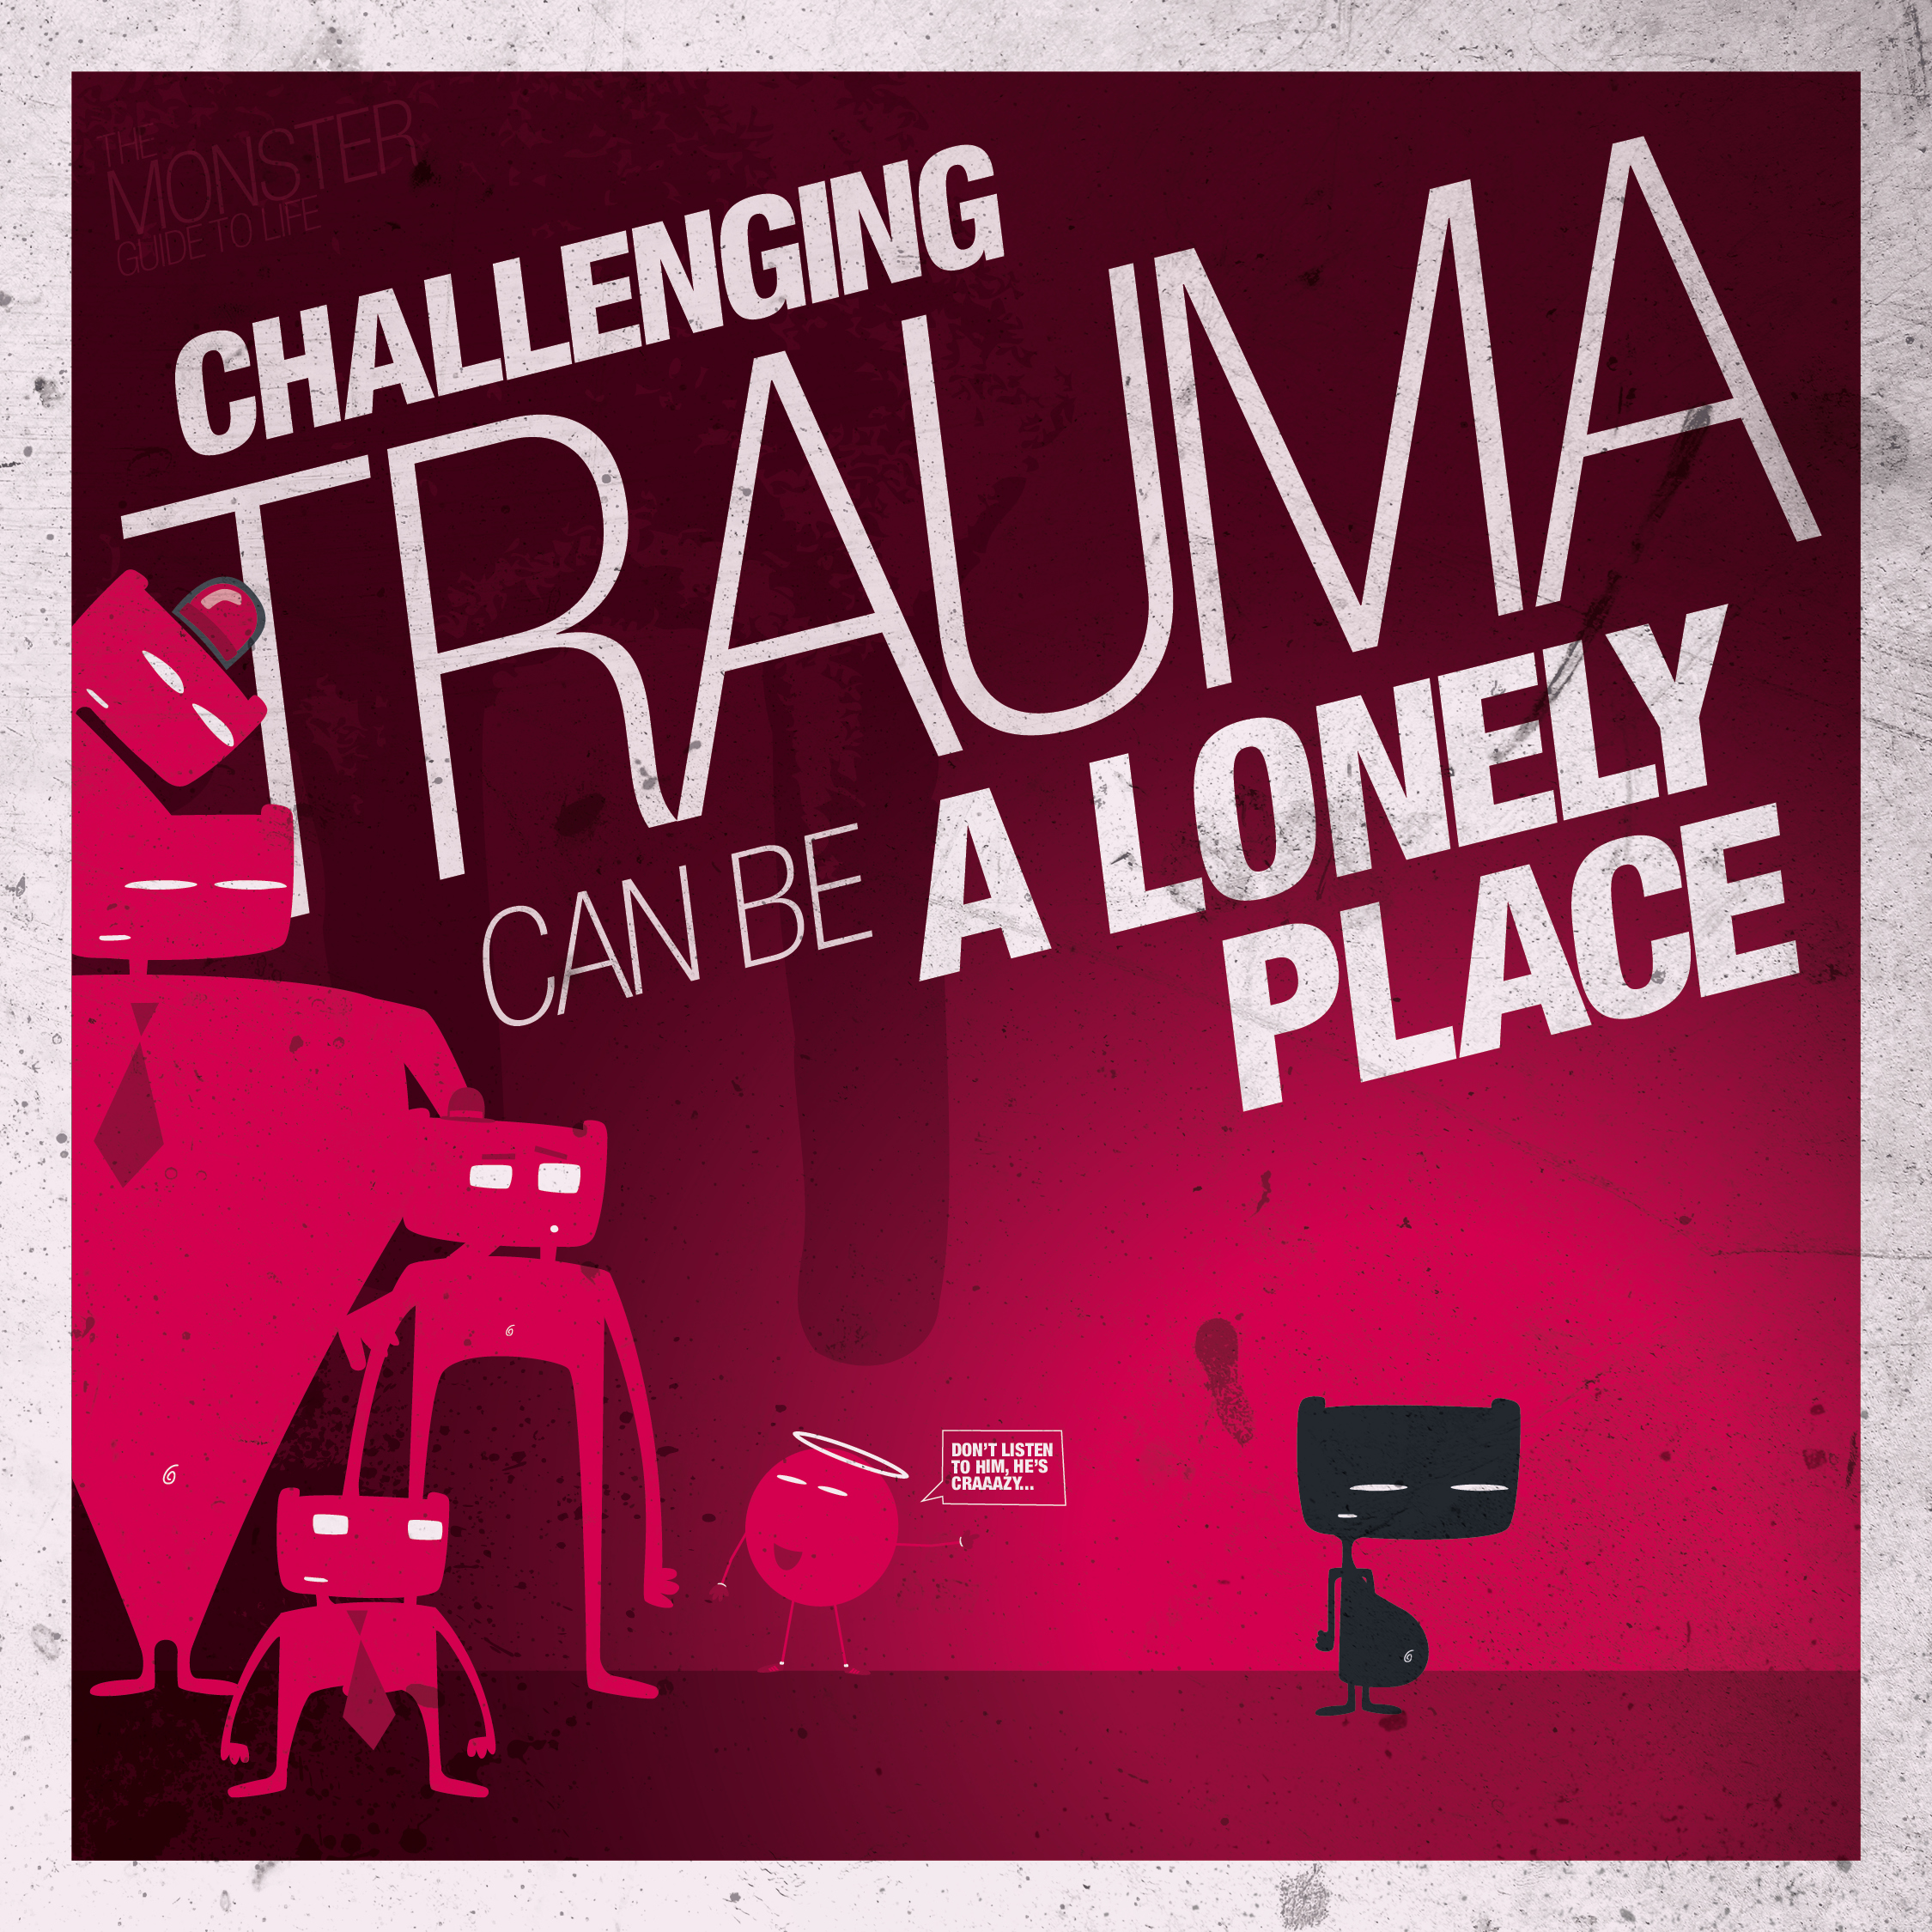 Challenging trauma can be a lonely place